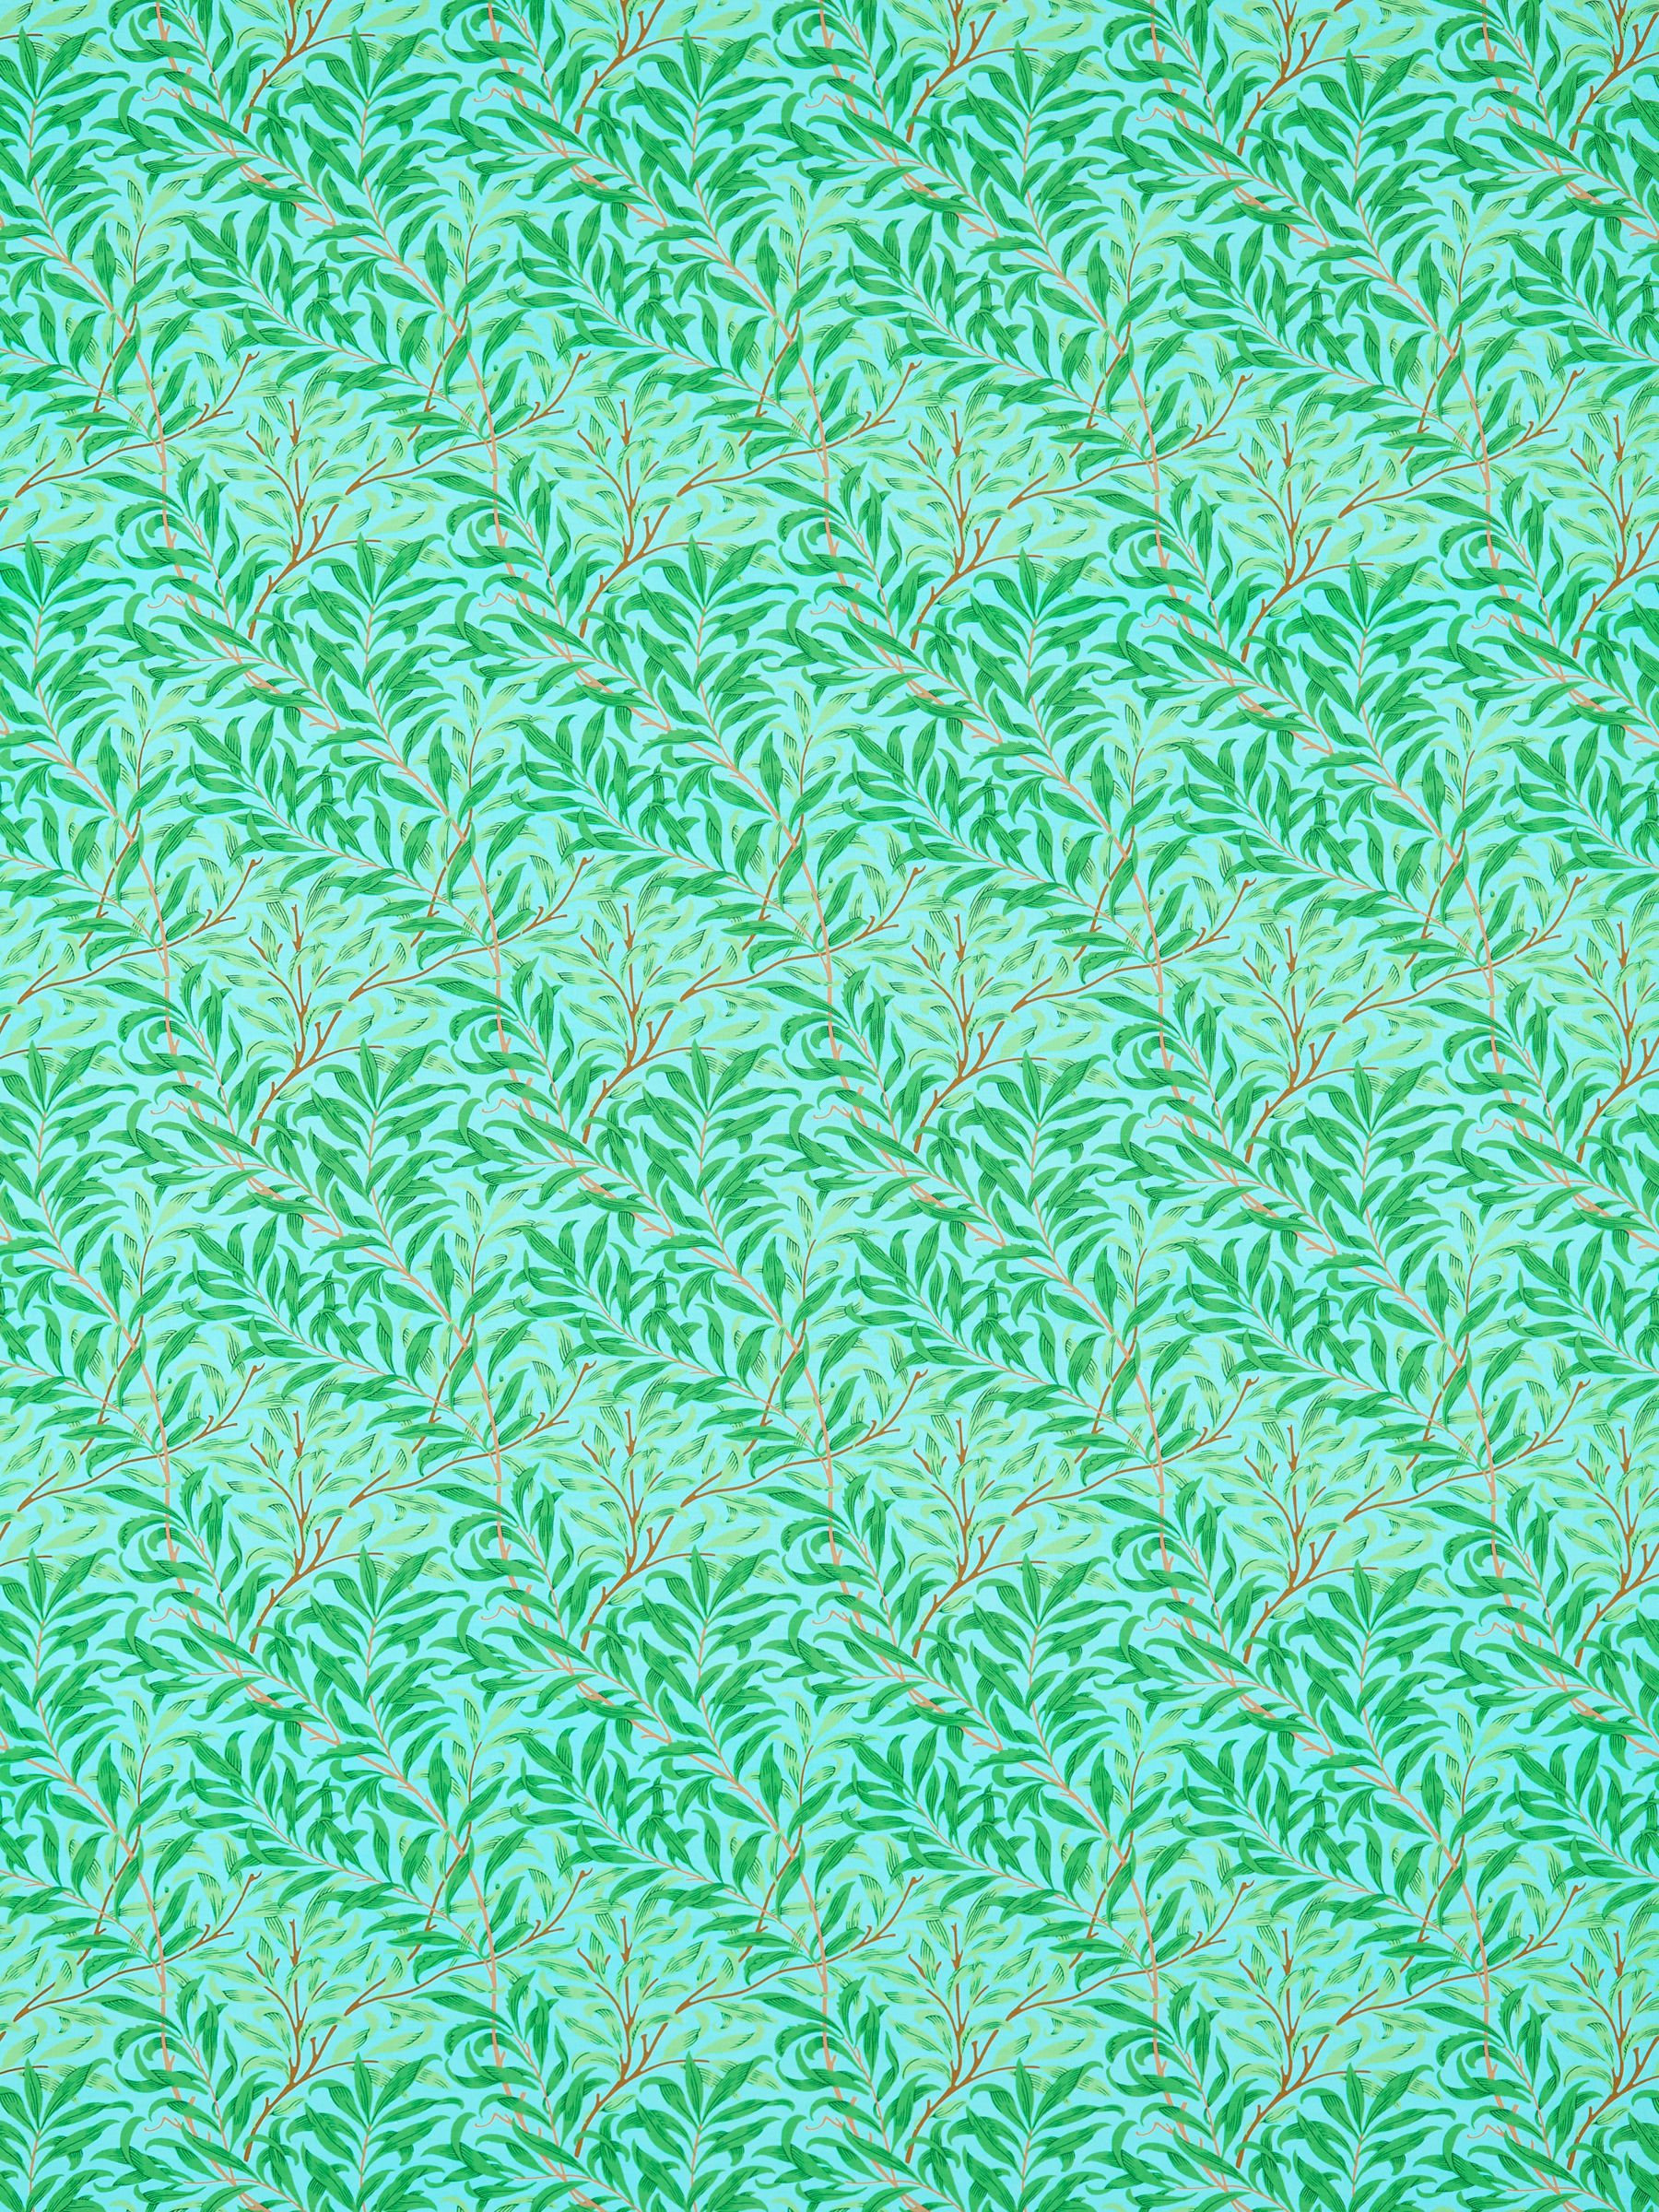 Morris & Co. Willow Boughs Furnishing Fabric, Sky/Leaf Green